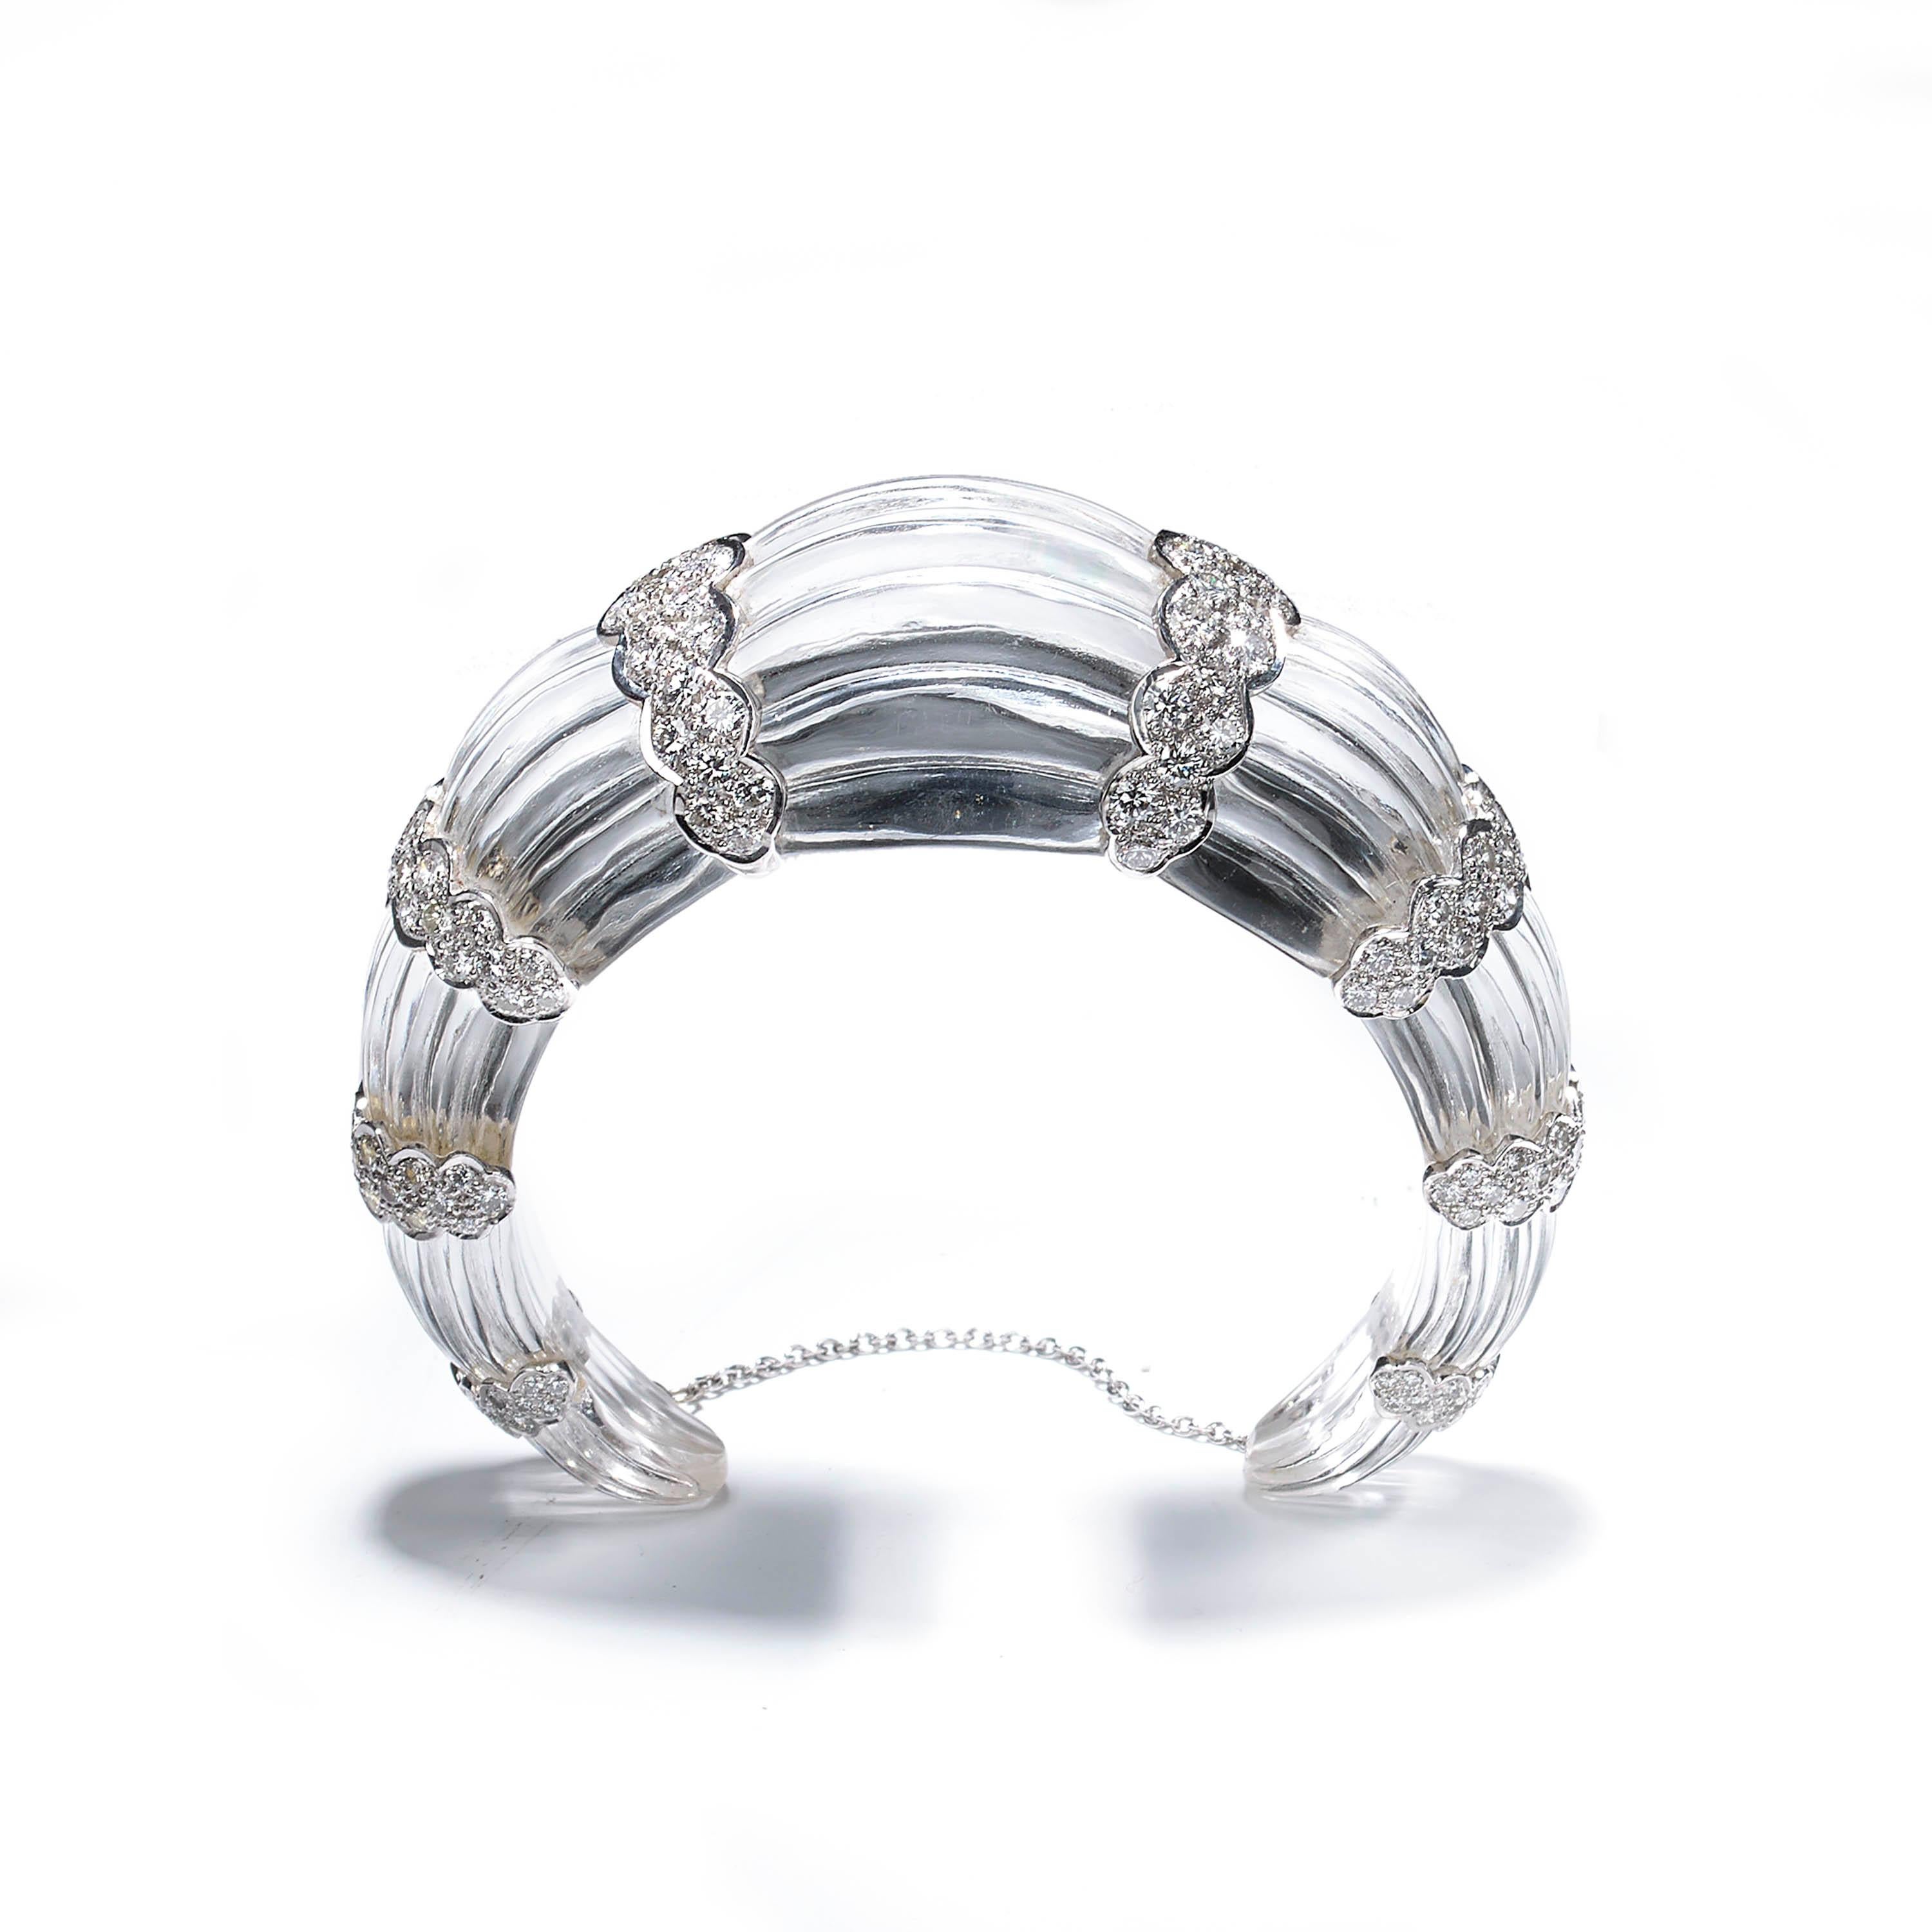 A modern, fluted rock crystal bangle bracelet, carved from one single piece of rock crystal, with eight scalloped 18ct white gold sections, each set with round brilliant-cut diamonds, weighing an estimated total of 7.00 carats. With a white gold